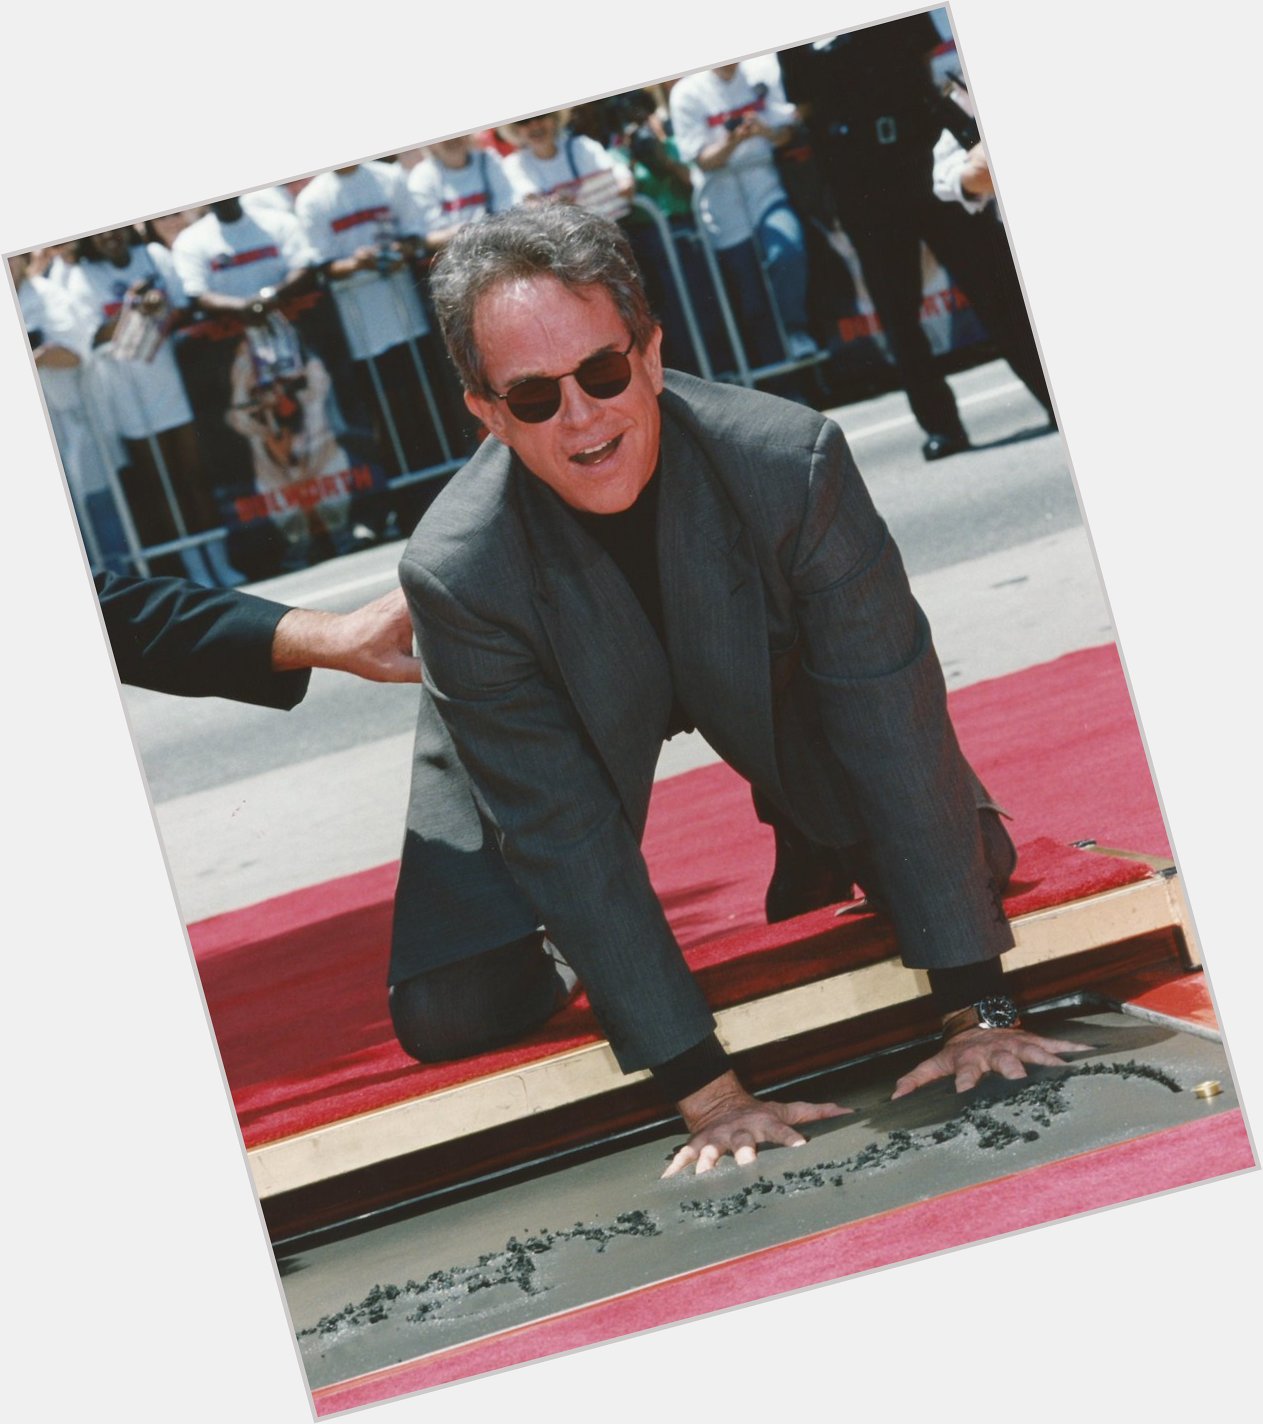 Happy 80th birthday Warren Beatty! Pictured at his imprint ceremony in 1998. 